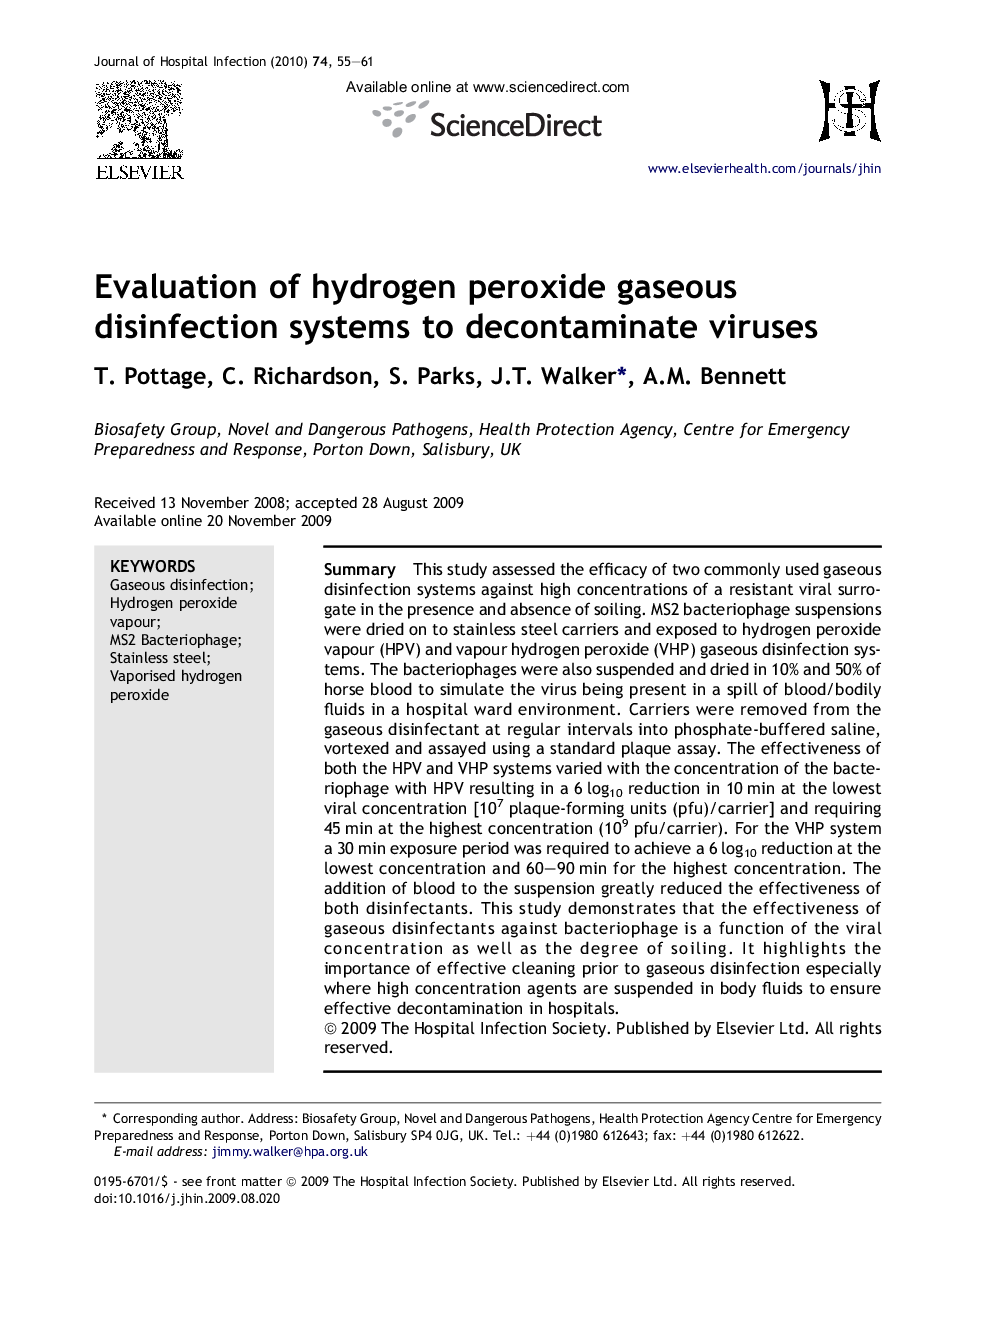 Evaluation of hydrogen peroxide gaseous disinfection systems to decontaminate viruses